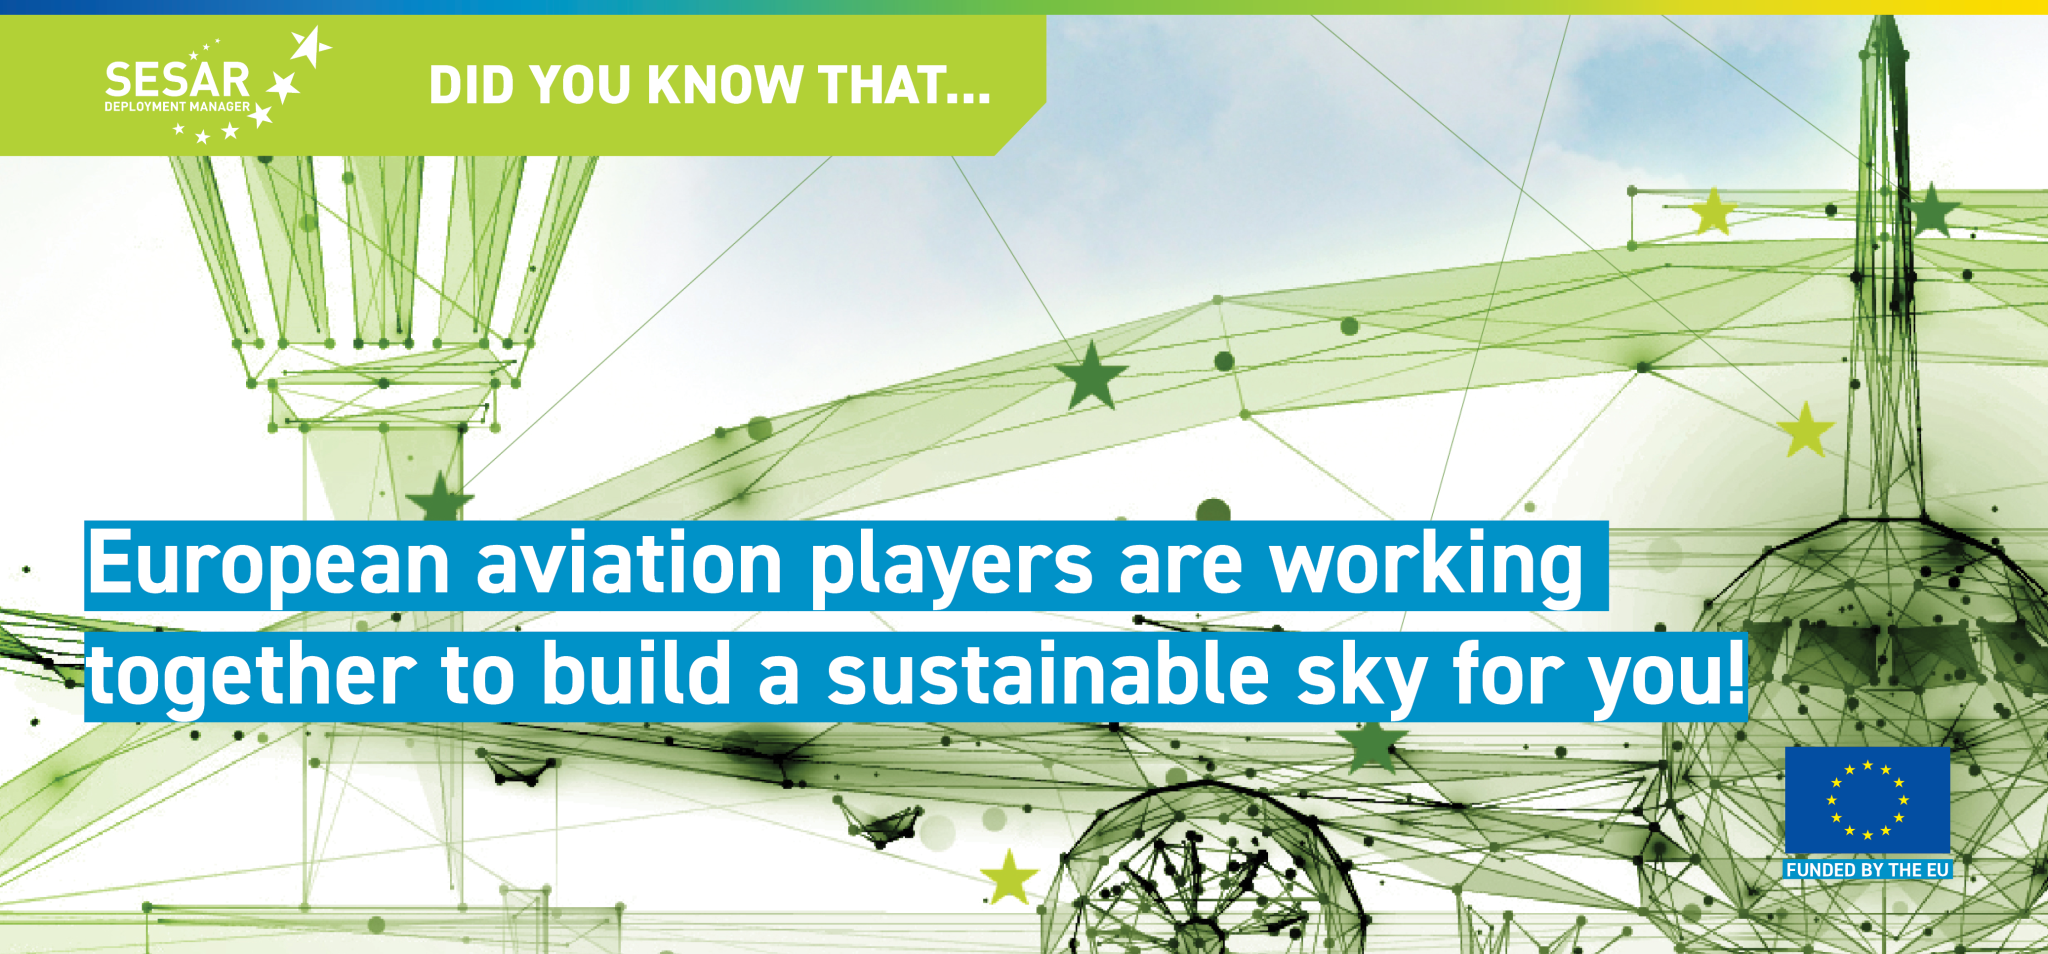 Did you know that... European aviation players are building a sustainable sky together for you! #DYKT